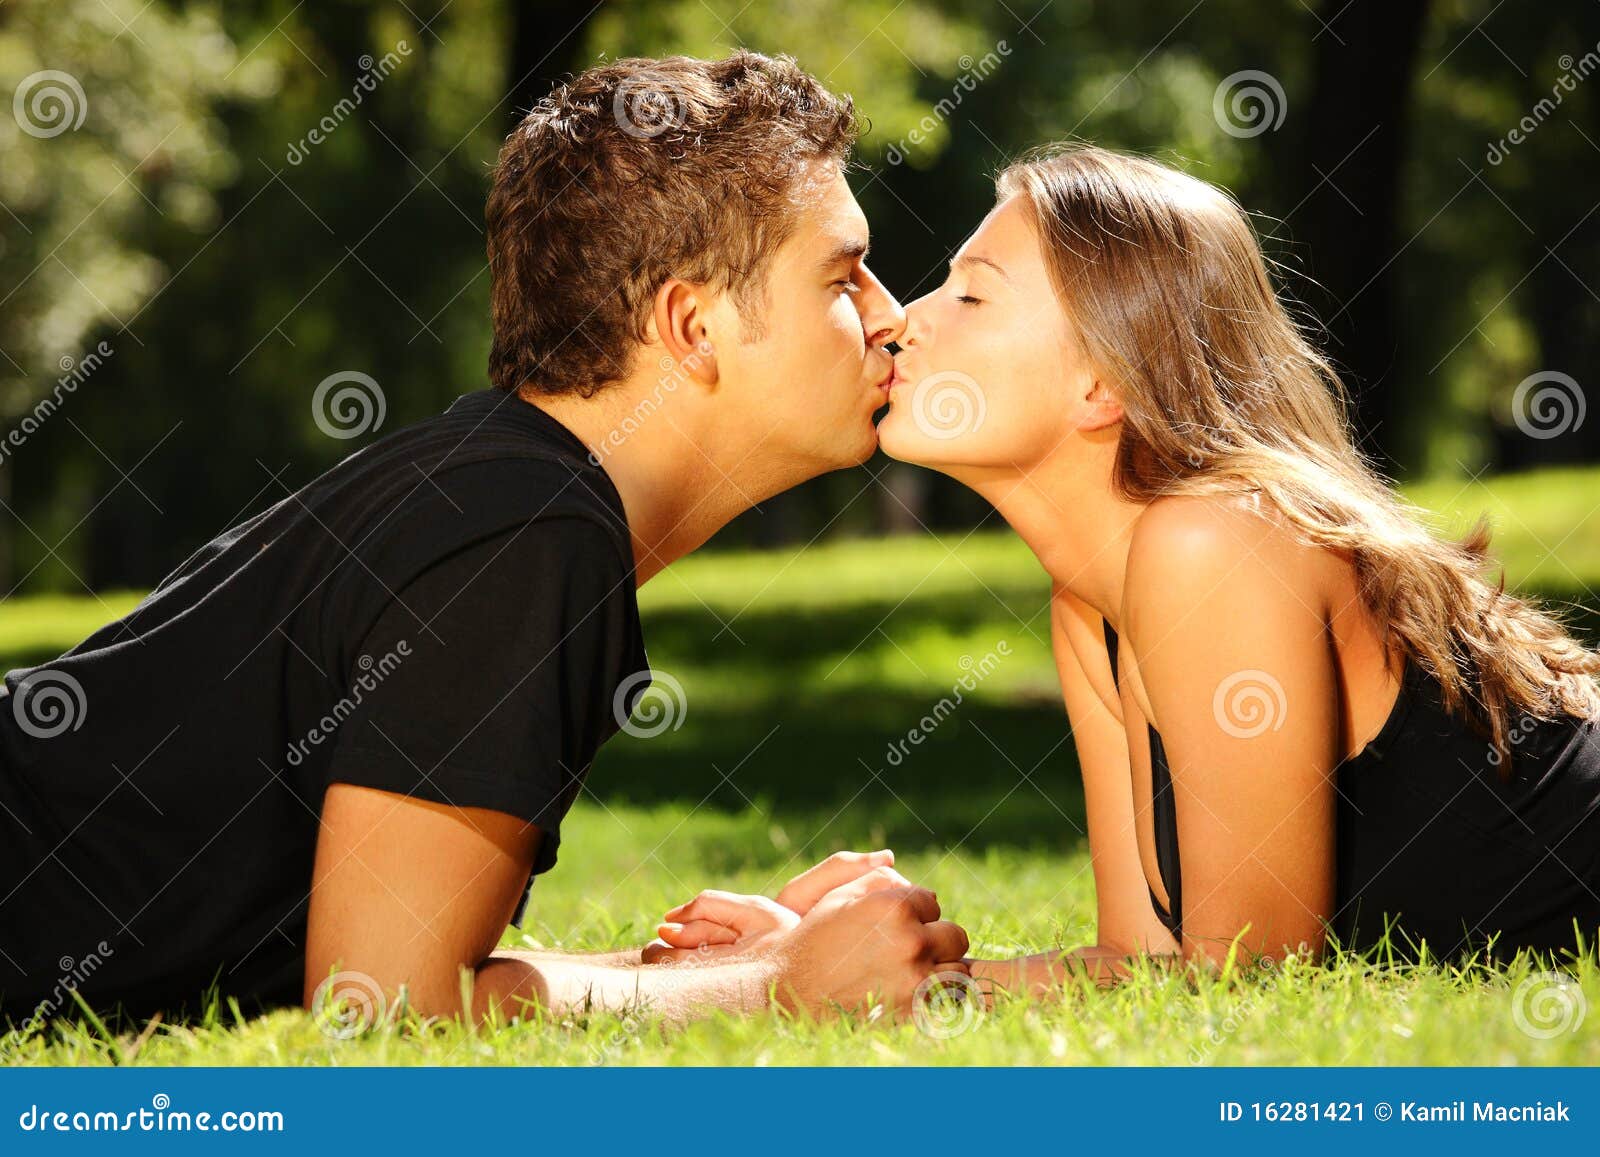 Young Nice Couple Kissing in the Park Stock Image - Image of ...